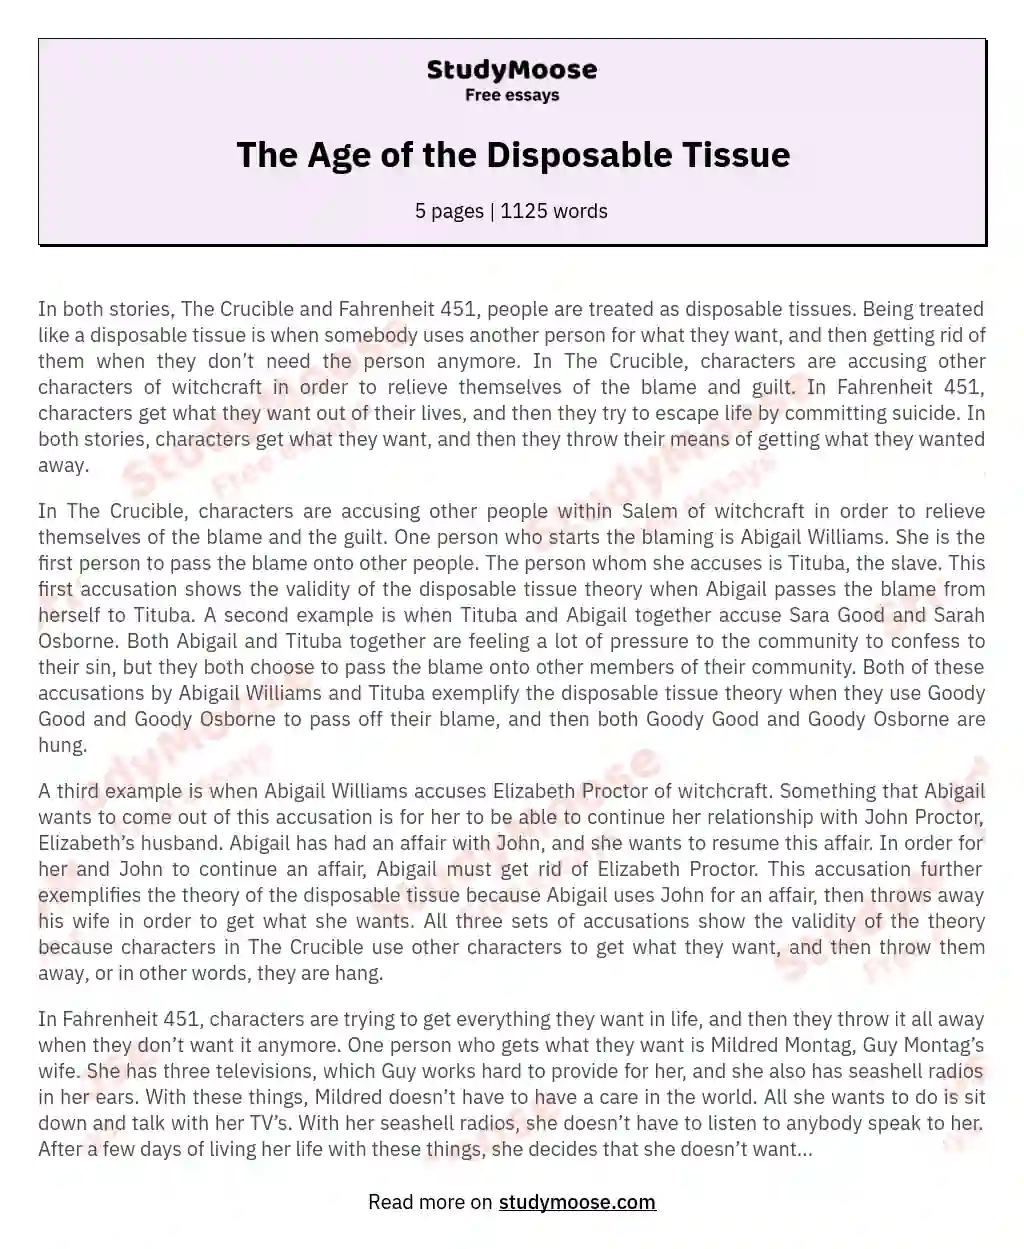 The Age of the Disposable Tissue essay